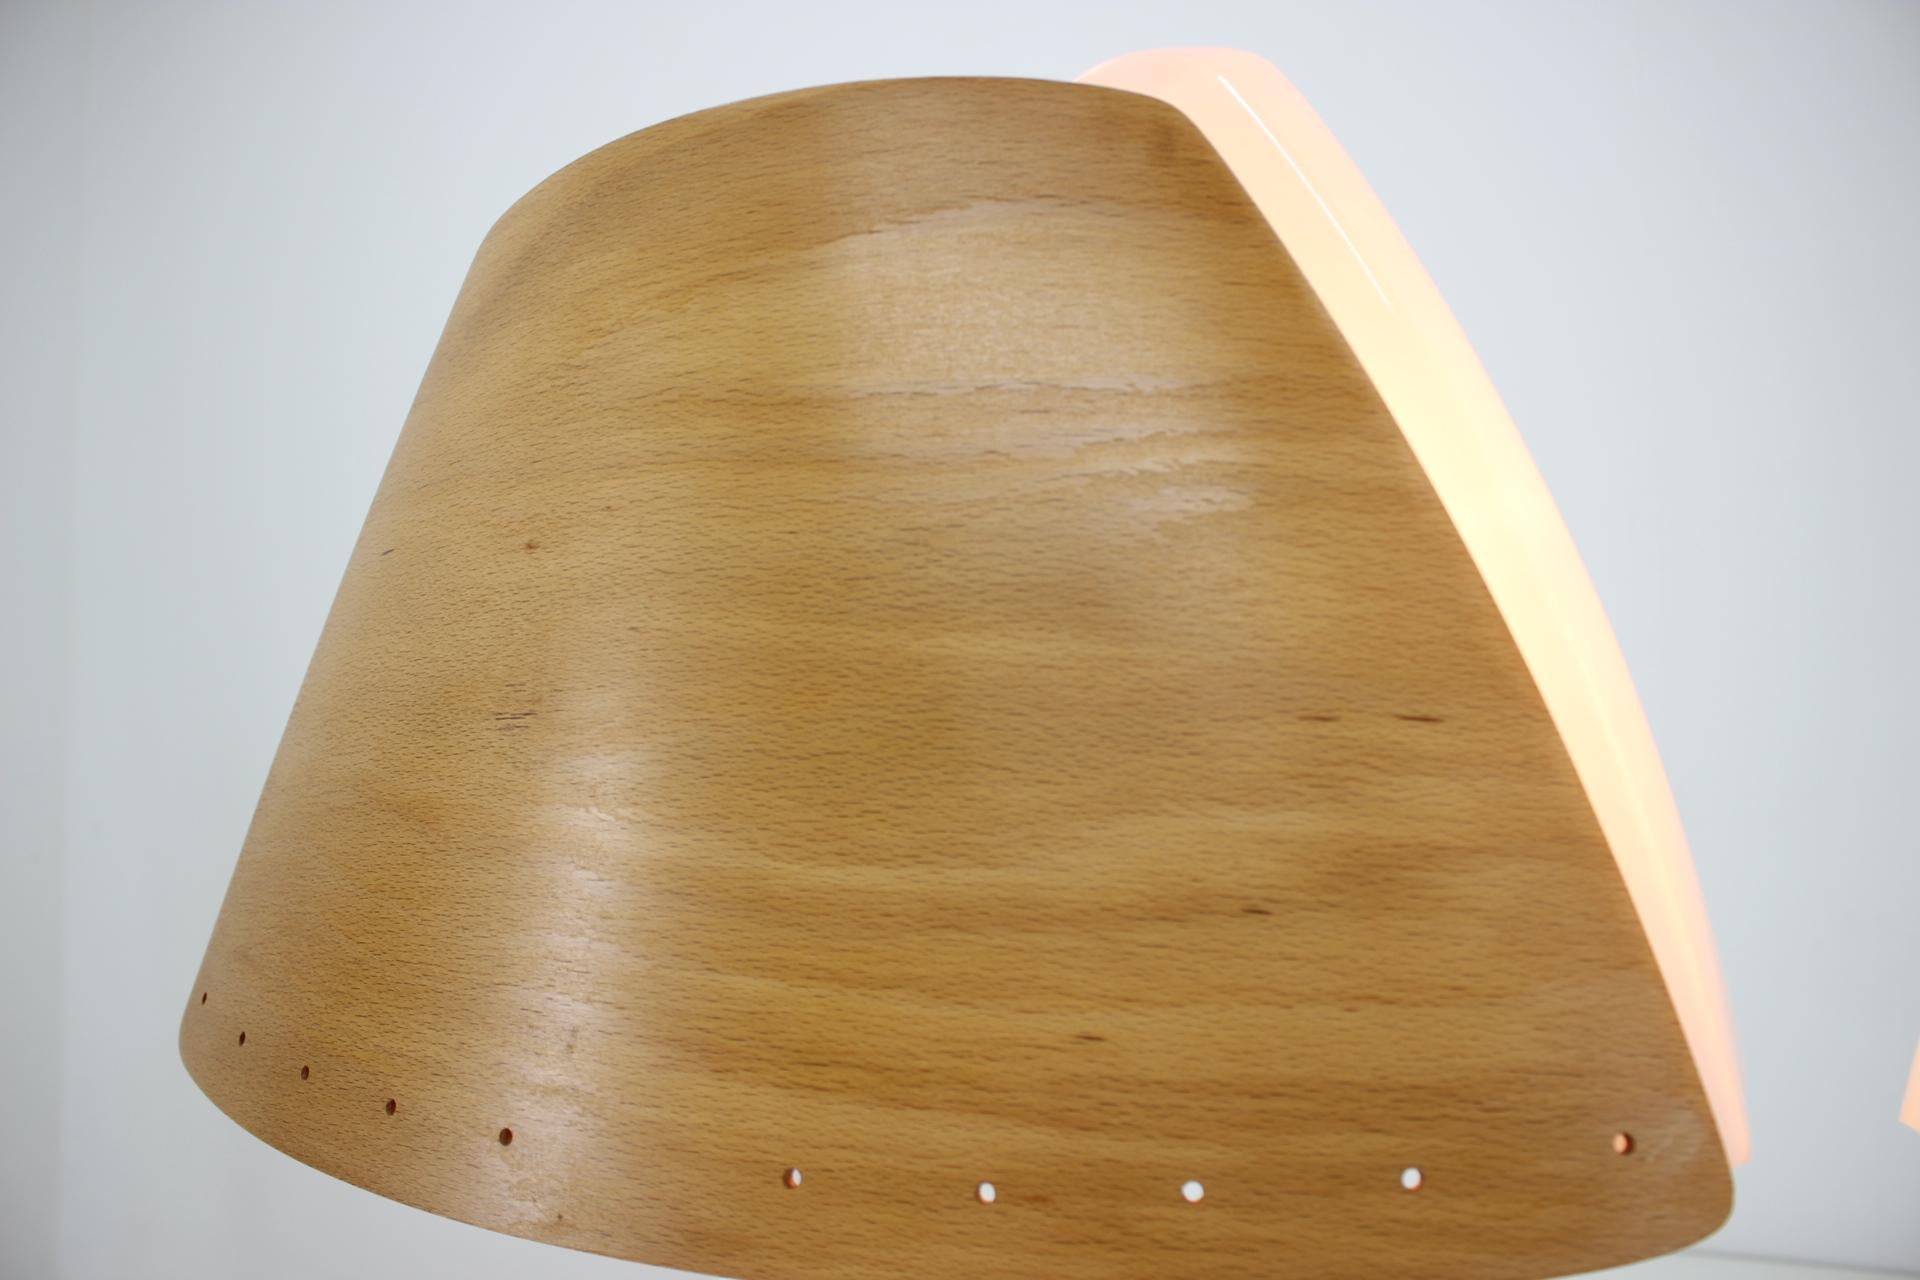 Metal Pair of Midcentury French Design Wooden Table Lamp by Lucid / 1970s, Renovated For Sale